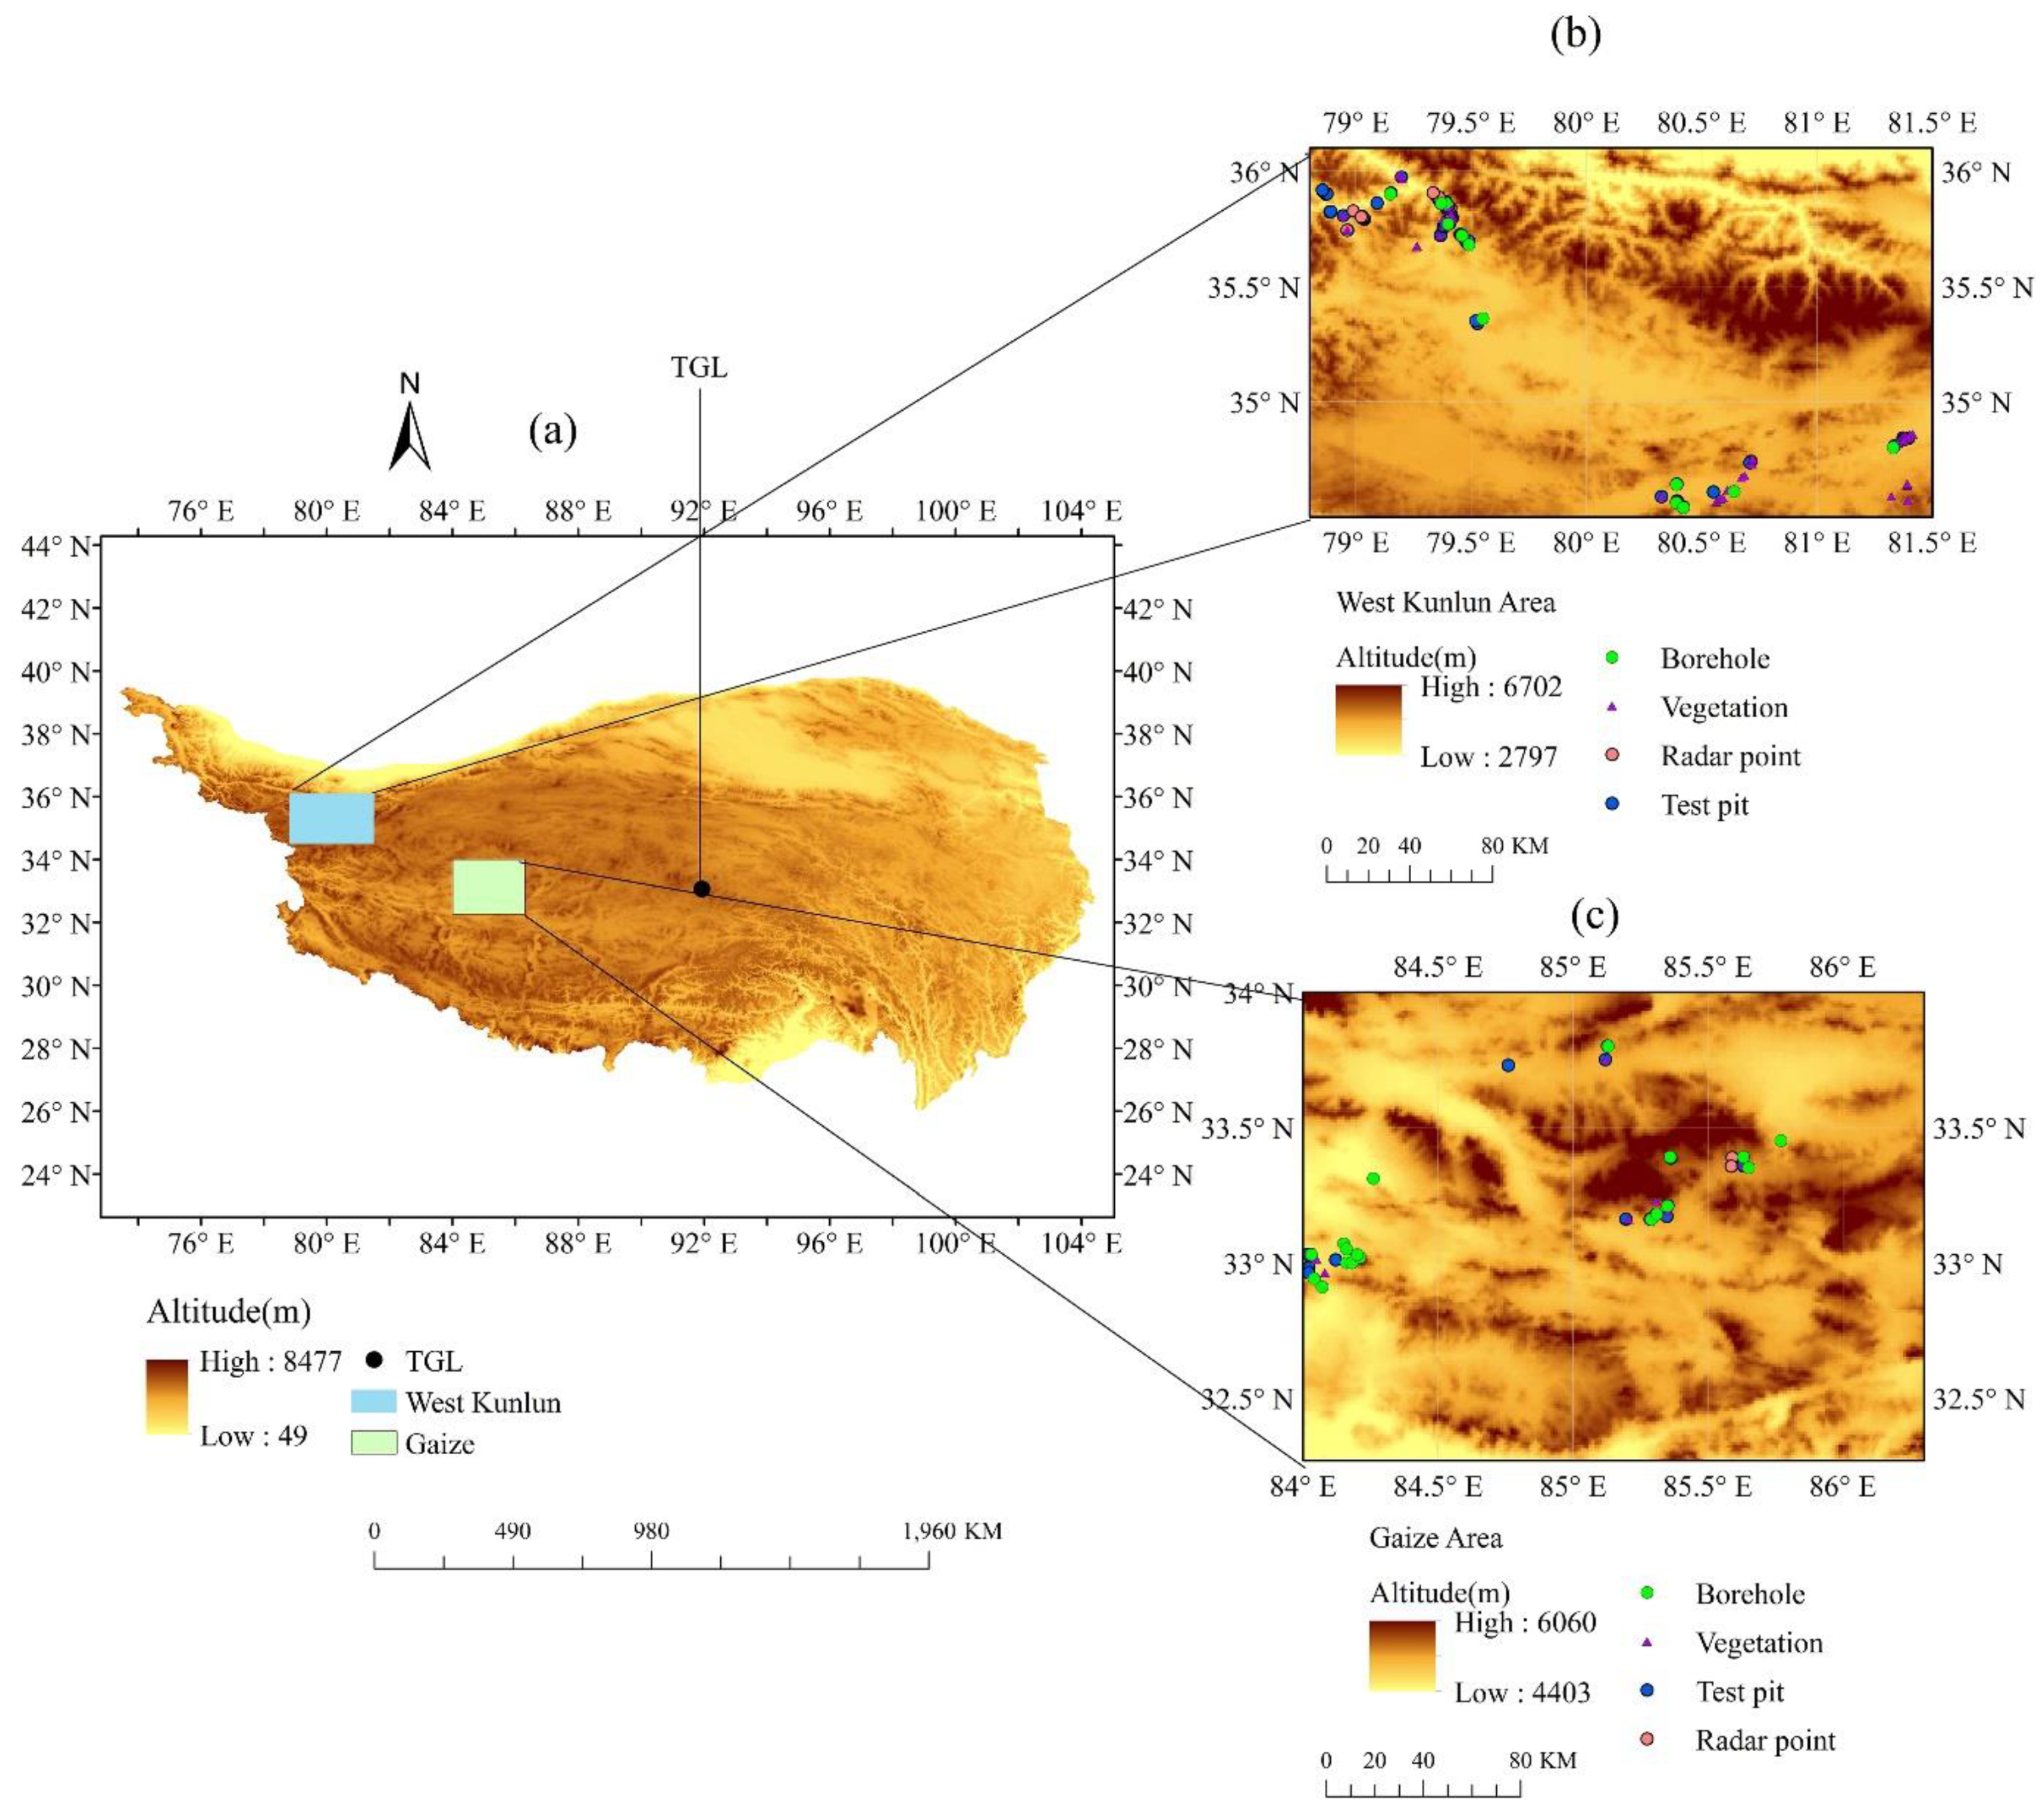 Remote Sensing | Free Full-Text | Modelling Permafrost Characteristics and  Its Relationship with Environmental Constraints in the Gaize Area,  Qinghai-Tibet Plateau, China